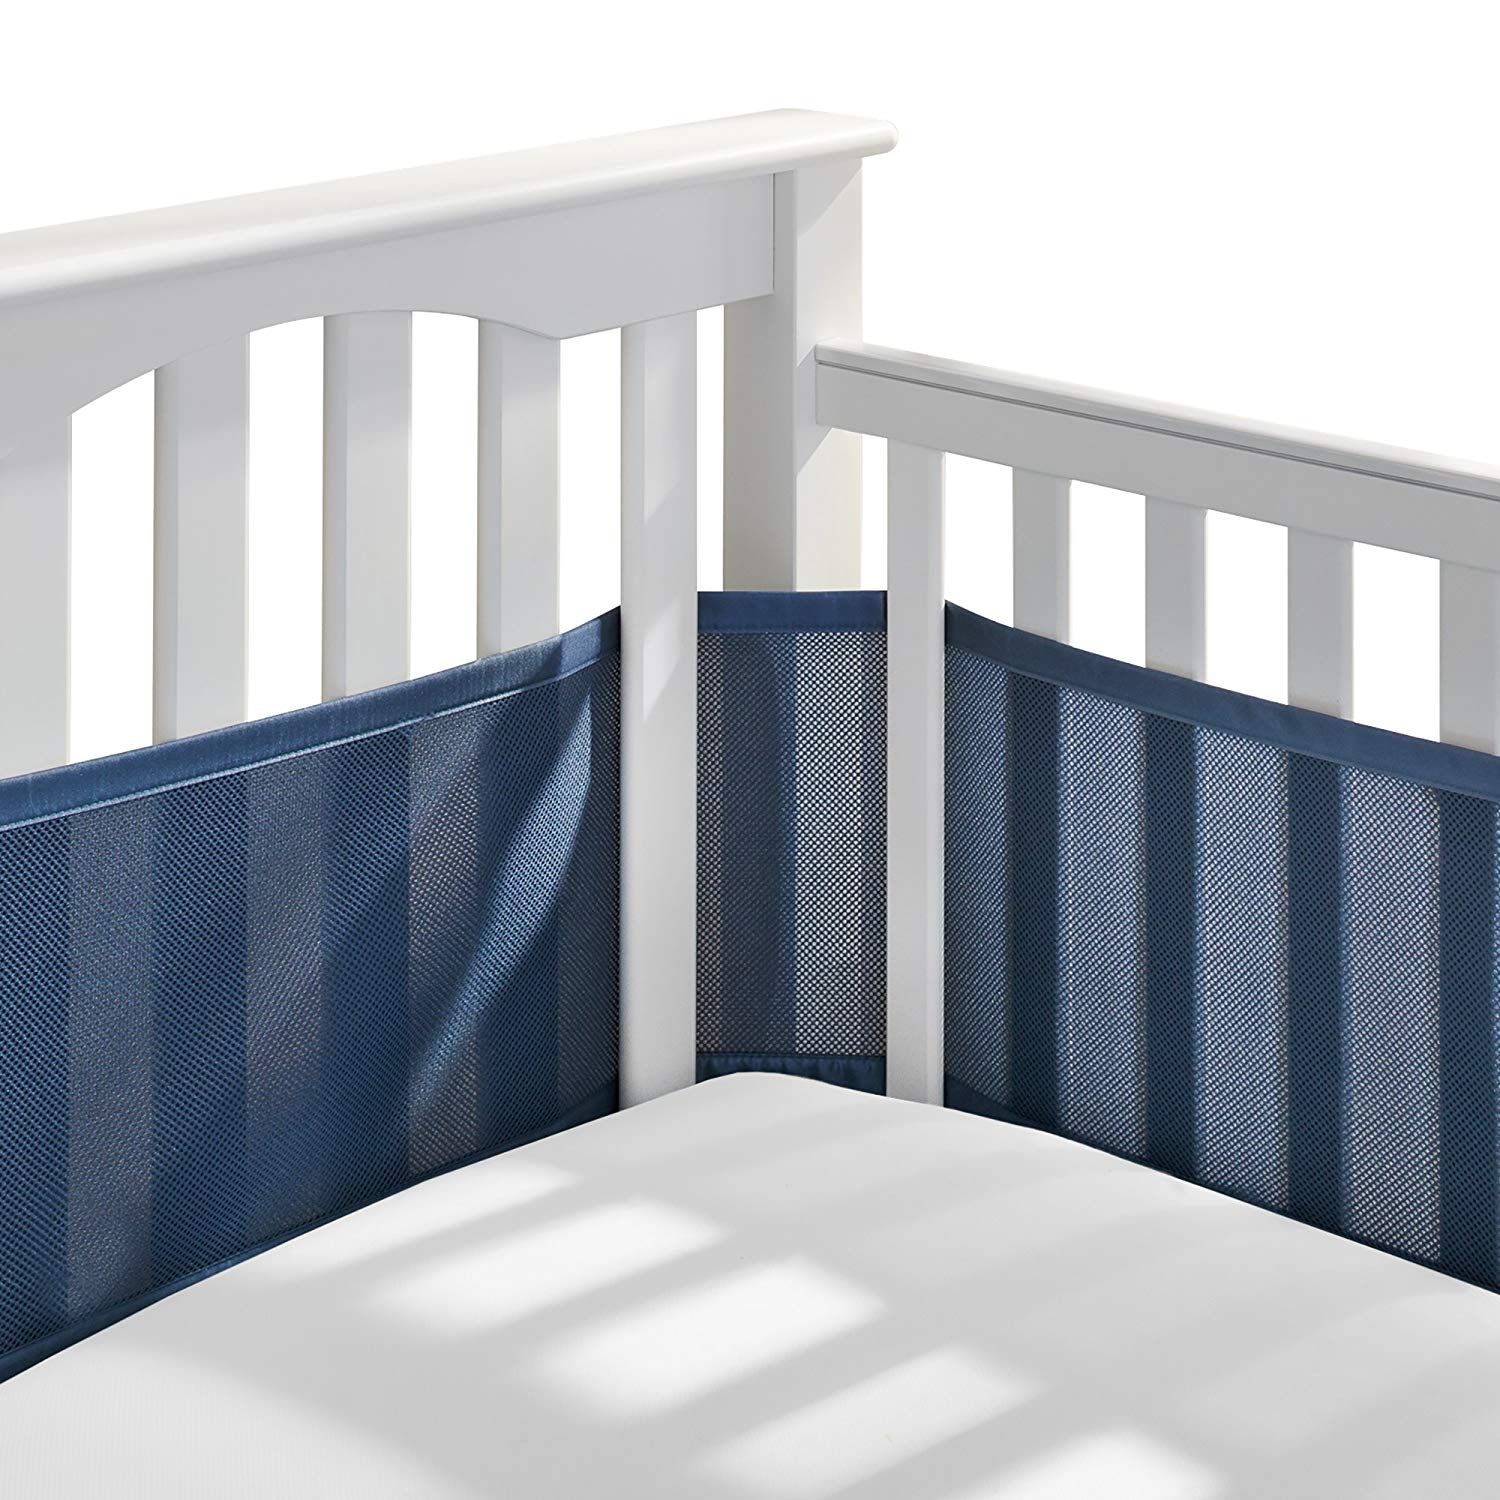 netted crib bumpers